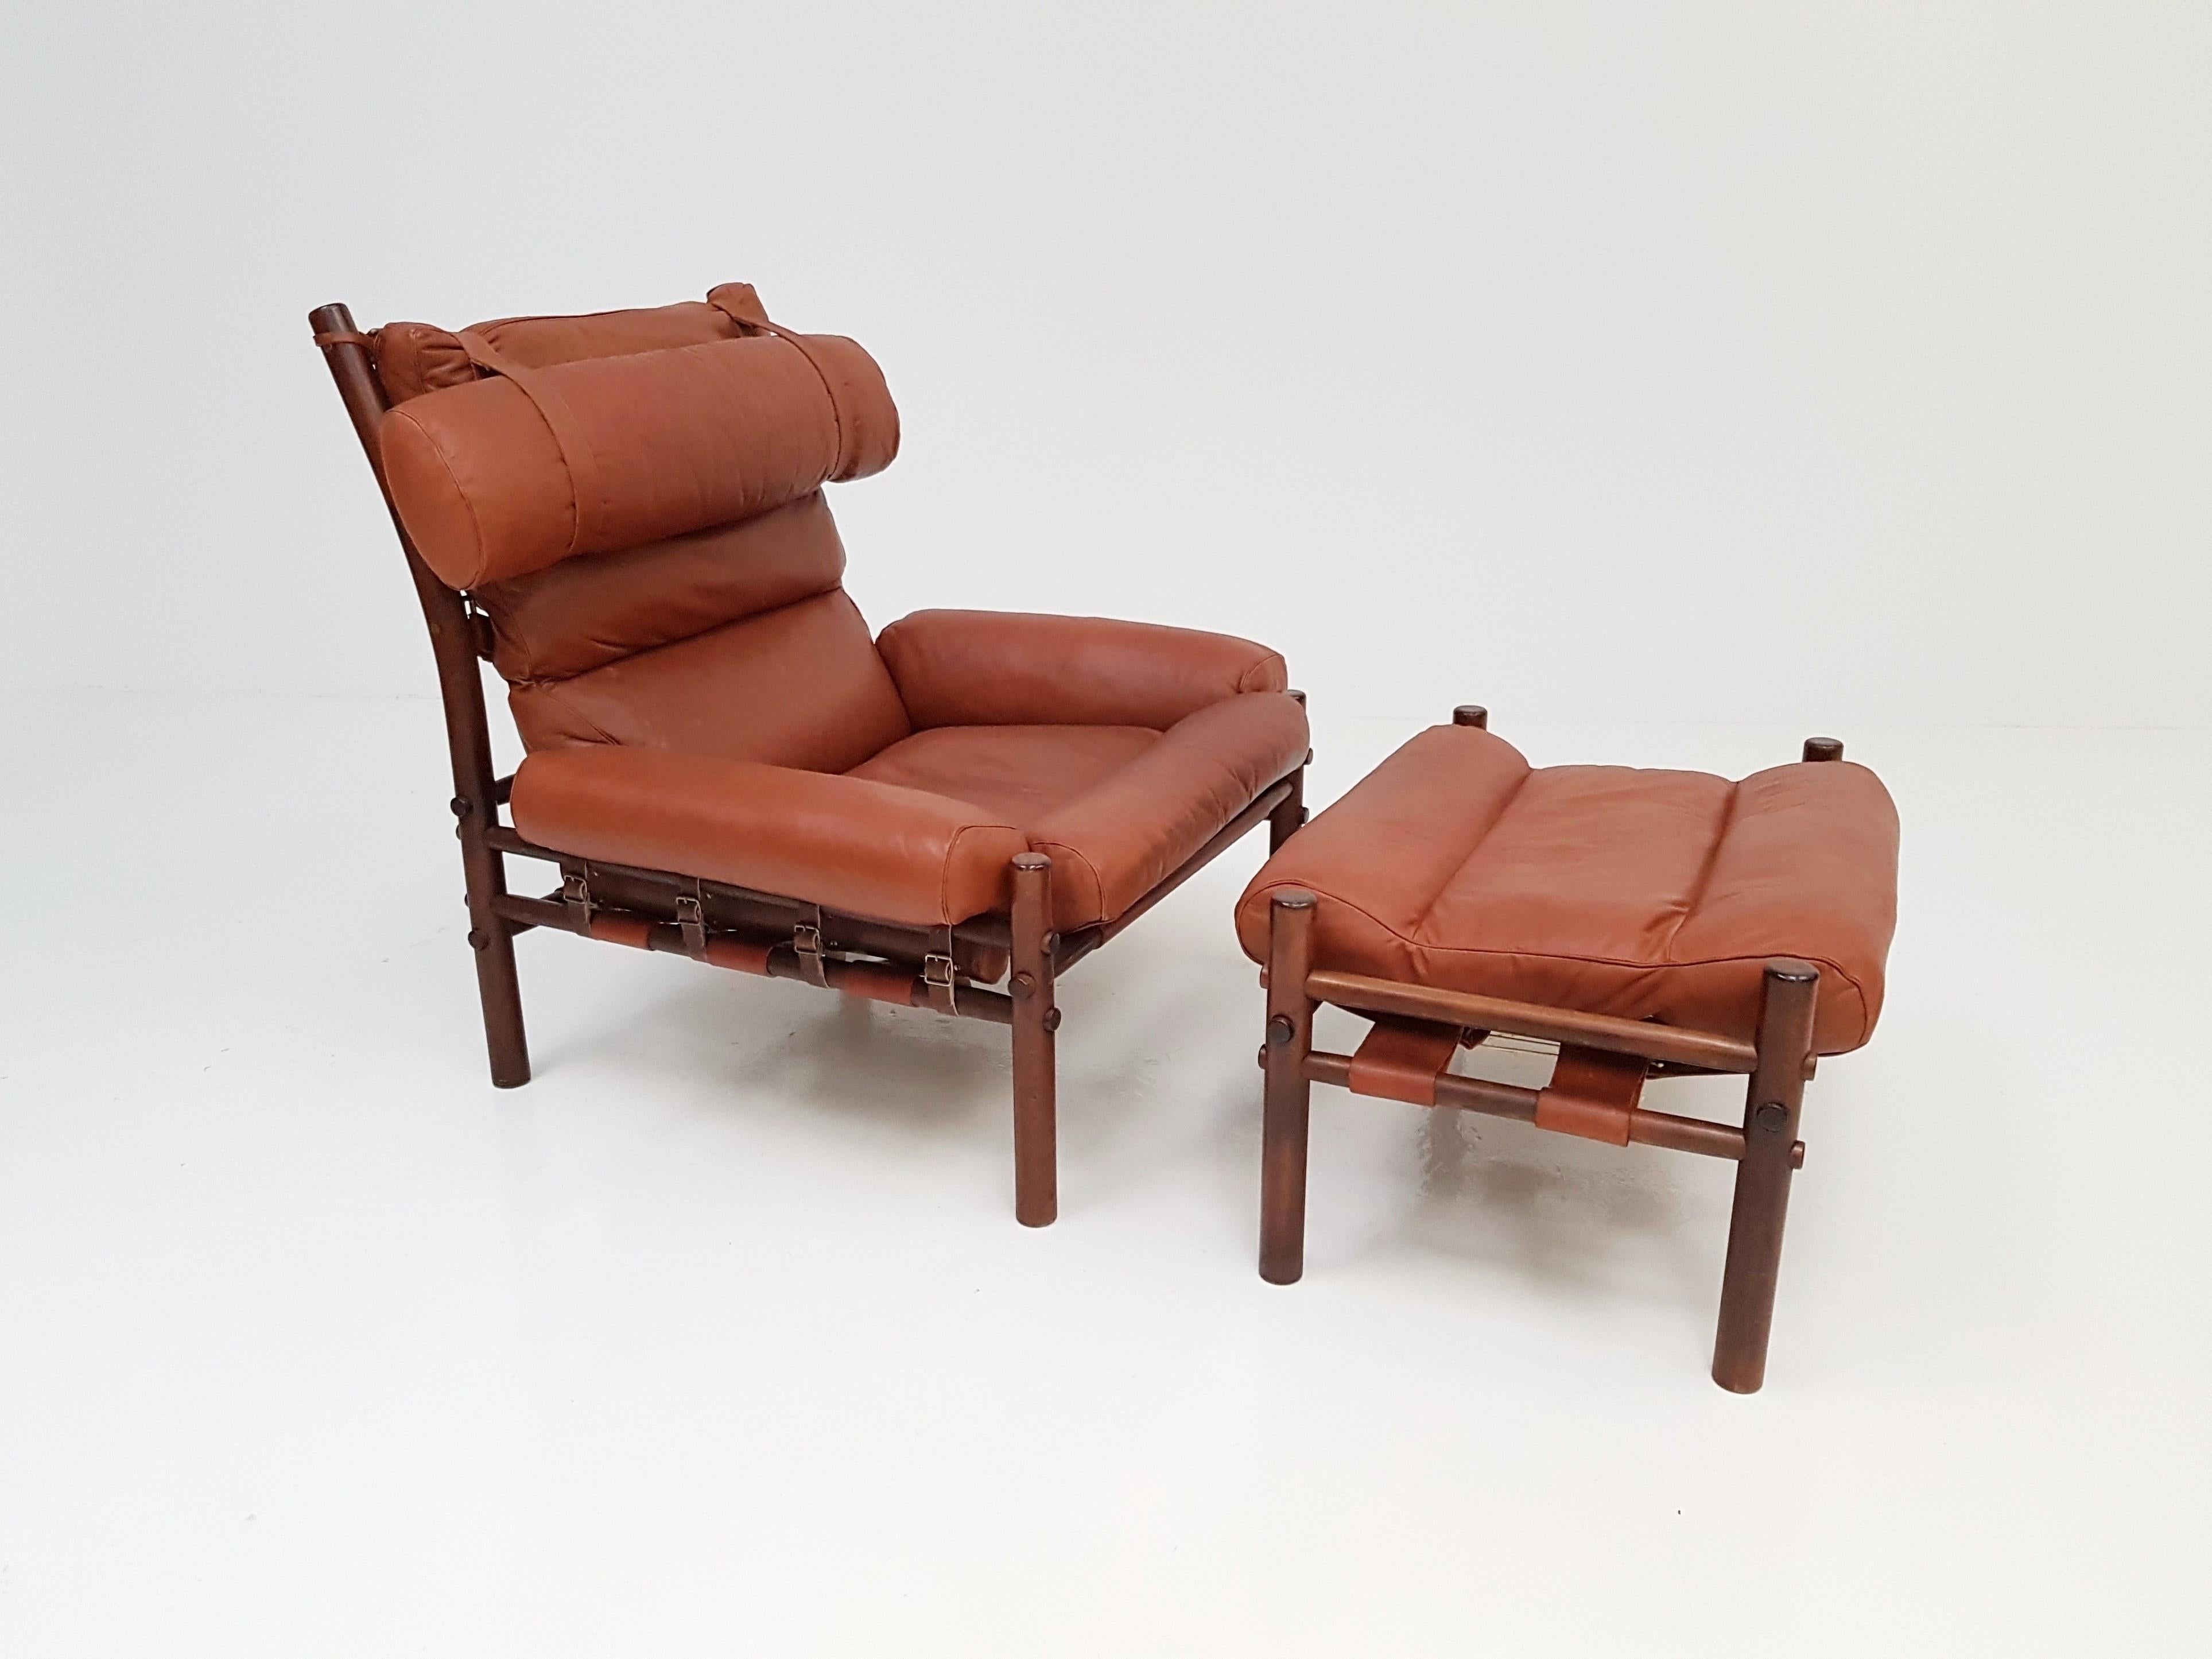 An iconic Inca chair and footstool by Swedish designer Arne Norell for Norell Möbler from the 1970s. An extremely comfortable chair which also looks amazing. The piece is in good vintage condition.

Consists of a stained beech frame with leather